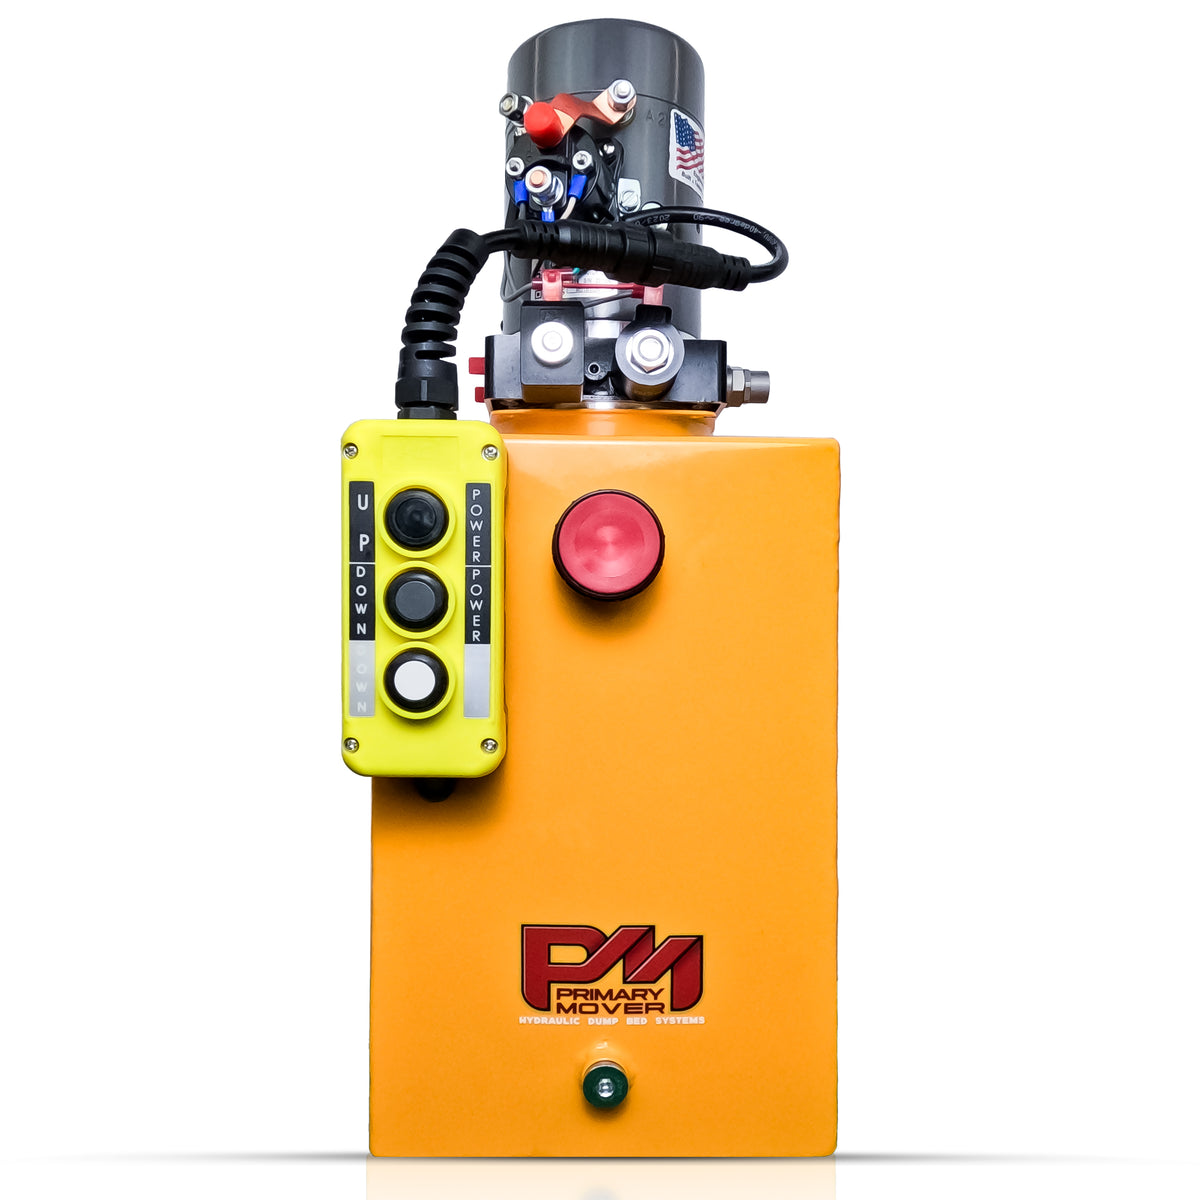 KTI 12V Double-Acting Hydraulic Pump with a steel reservoir, featuring a yellow control panel, black cord, and user-friendly buttons for efficient hydraulic dump bed operation.